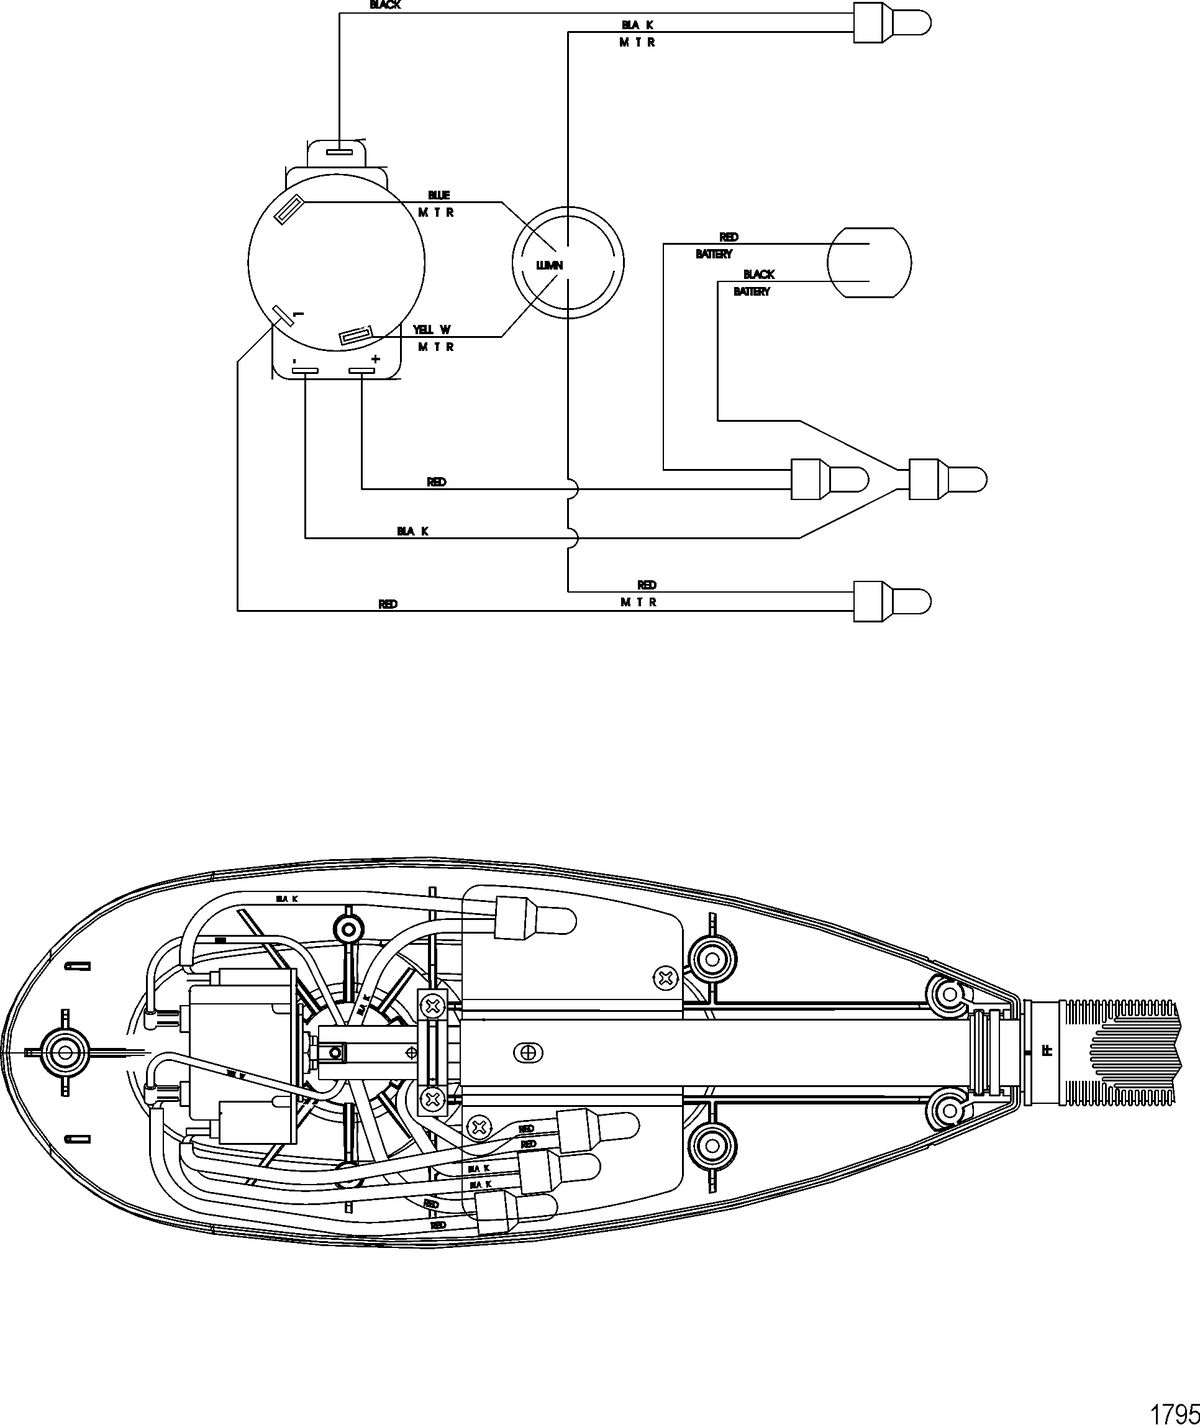 TROLLING MOTOR MOTORGUIDE FRESH WATER SERIES Wire Diagram(Model FW54HT) (Without Quick Connect)